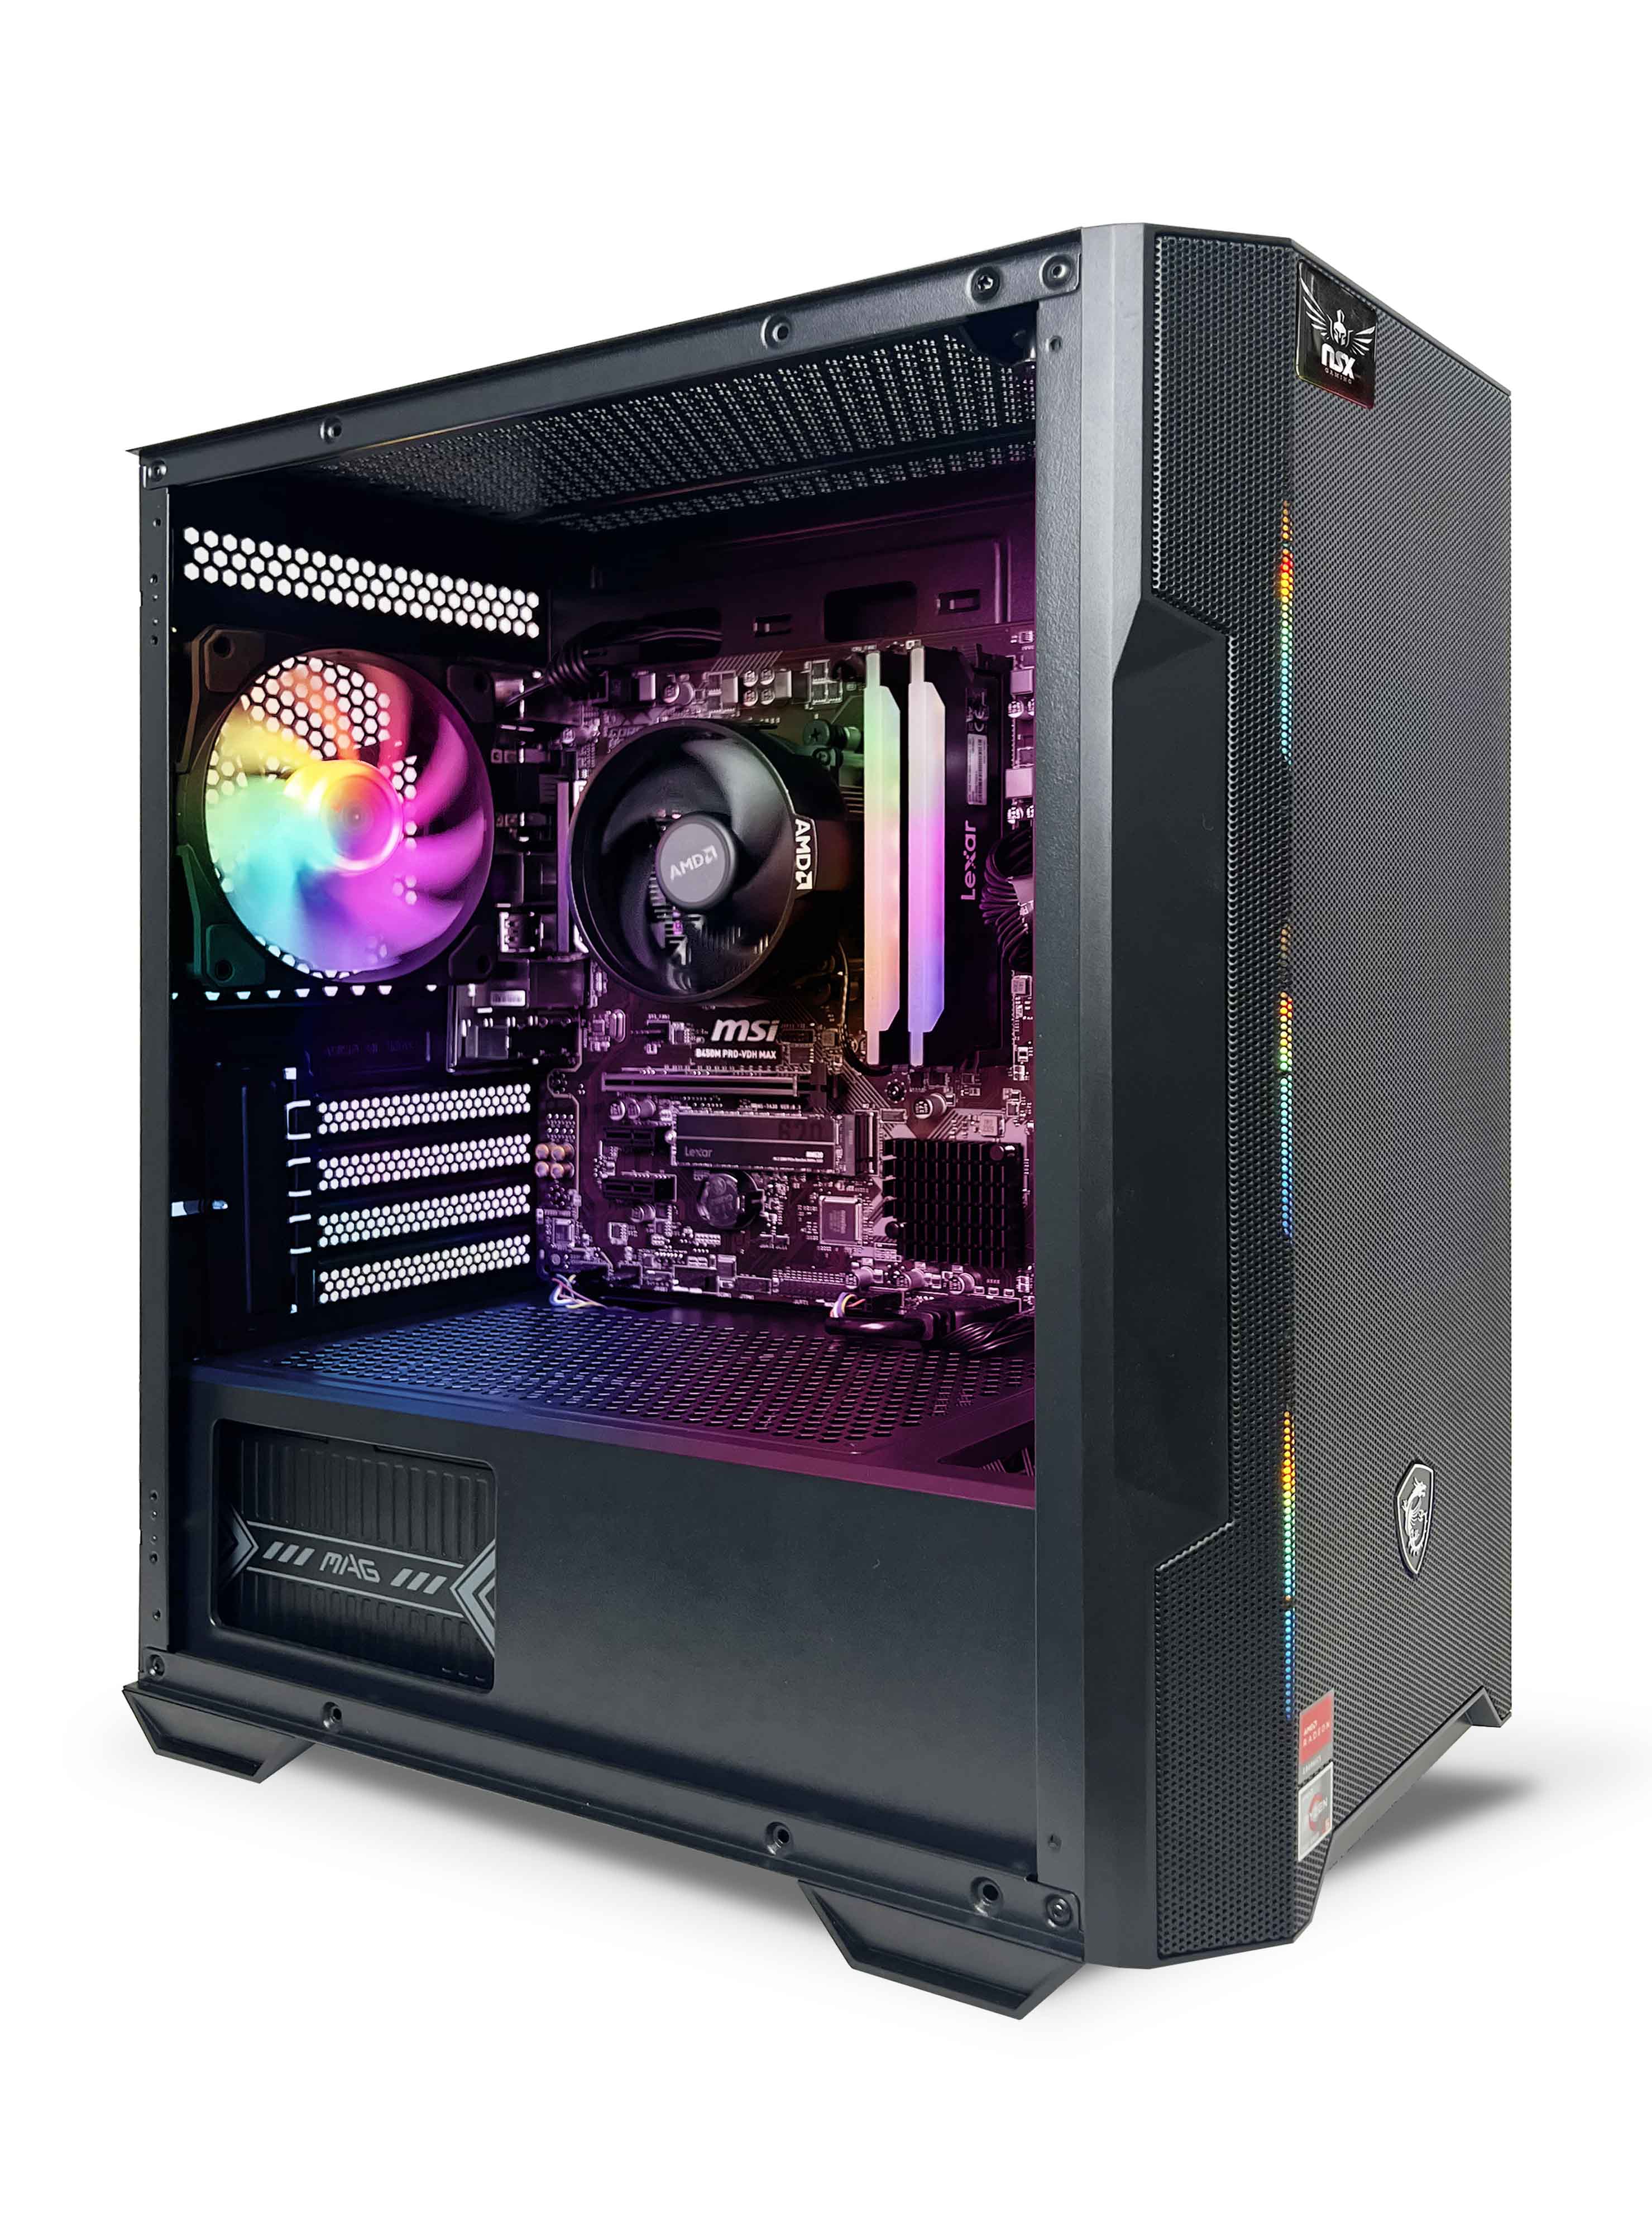 NSX GAMING Desktop Gaming Computer | Ryzen 7 5700G | 16GB DDR4 3600 | 512Gb M2 NVME SSD | RGB Fans | Windows 11 Home 64-bit | Integrated Graphics | Gaming Peripherals Included